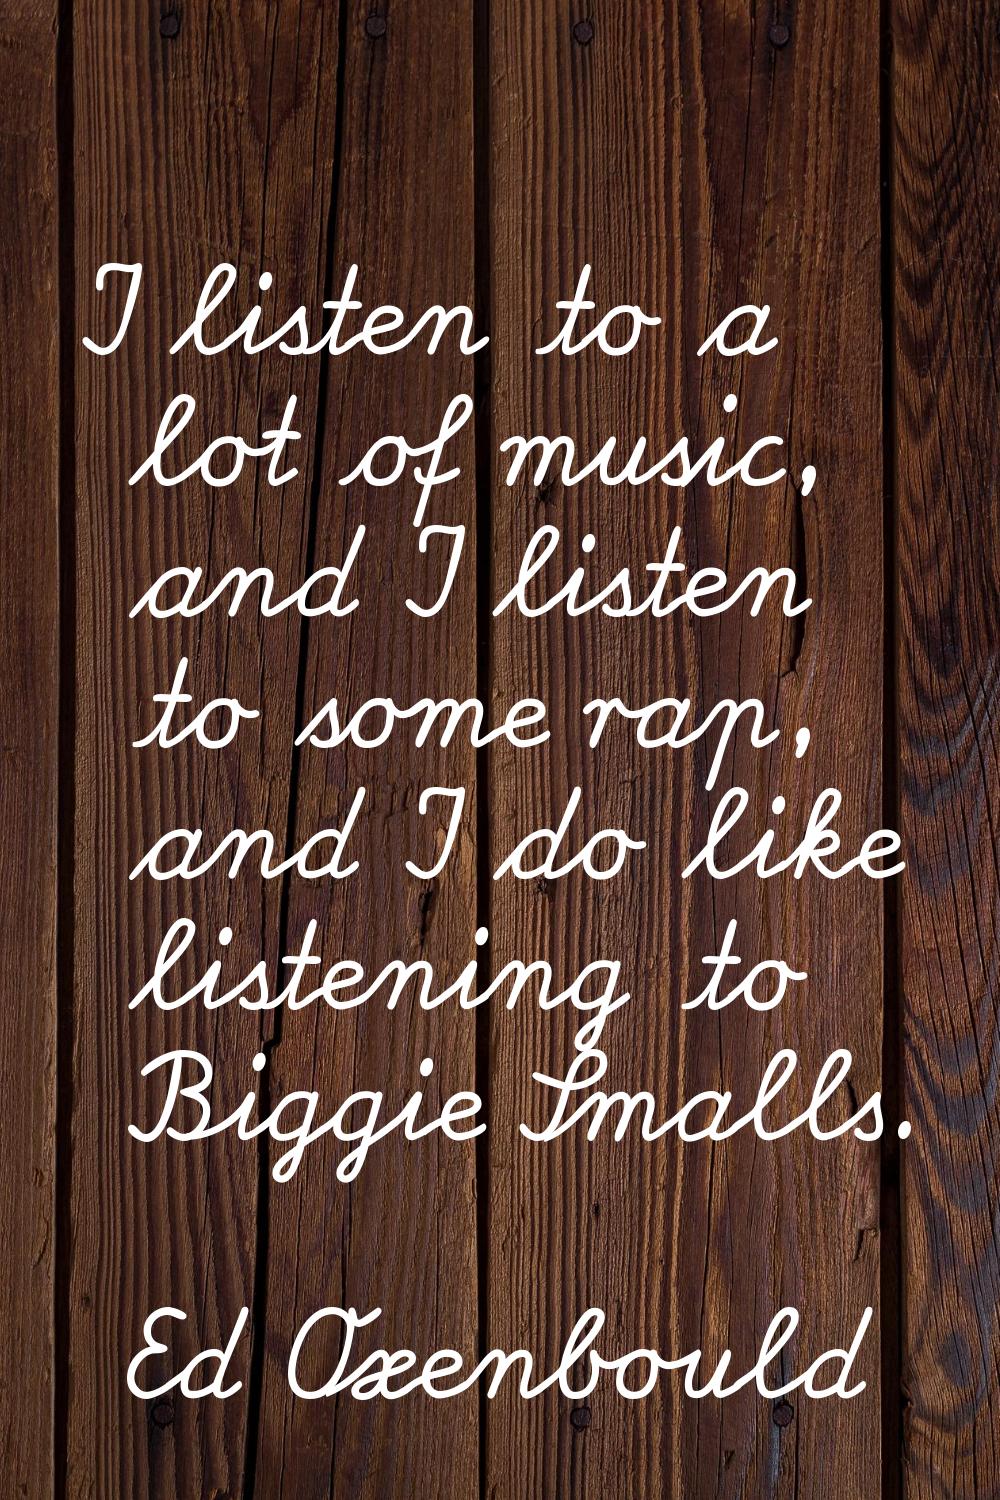 I listen to a lot of music, and I listen to some rap, and I do like listening to Biggie Smalls.